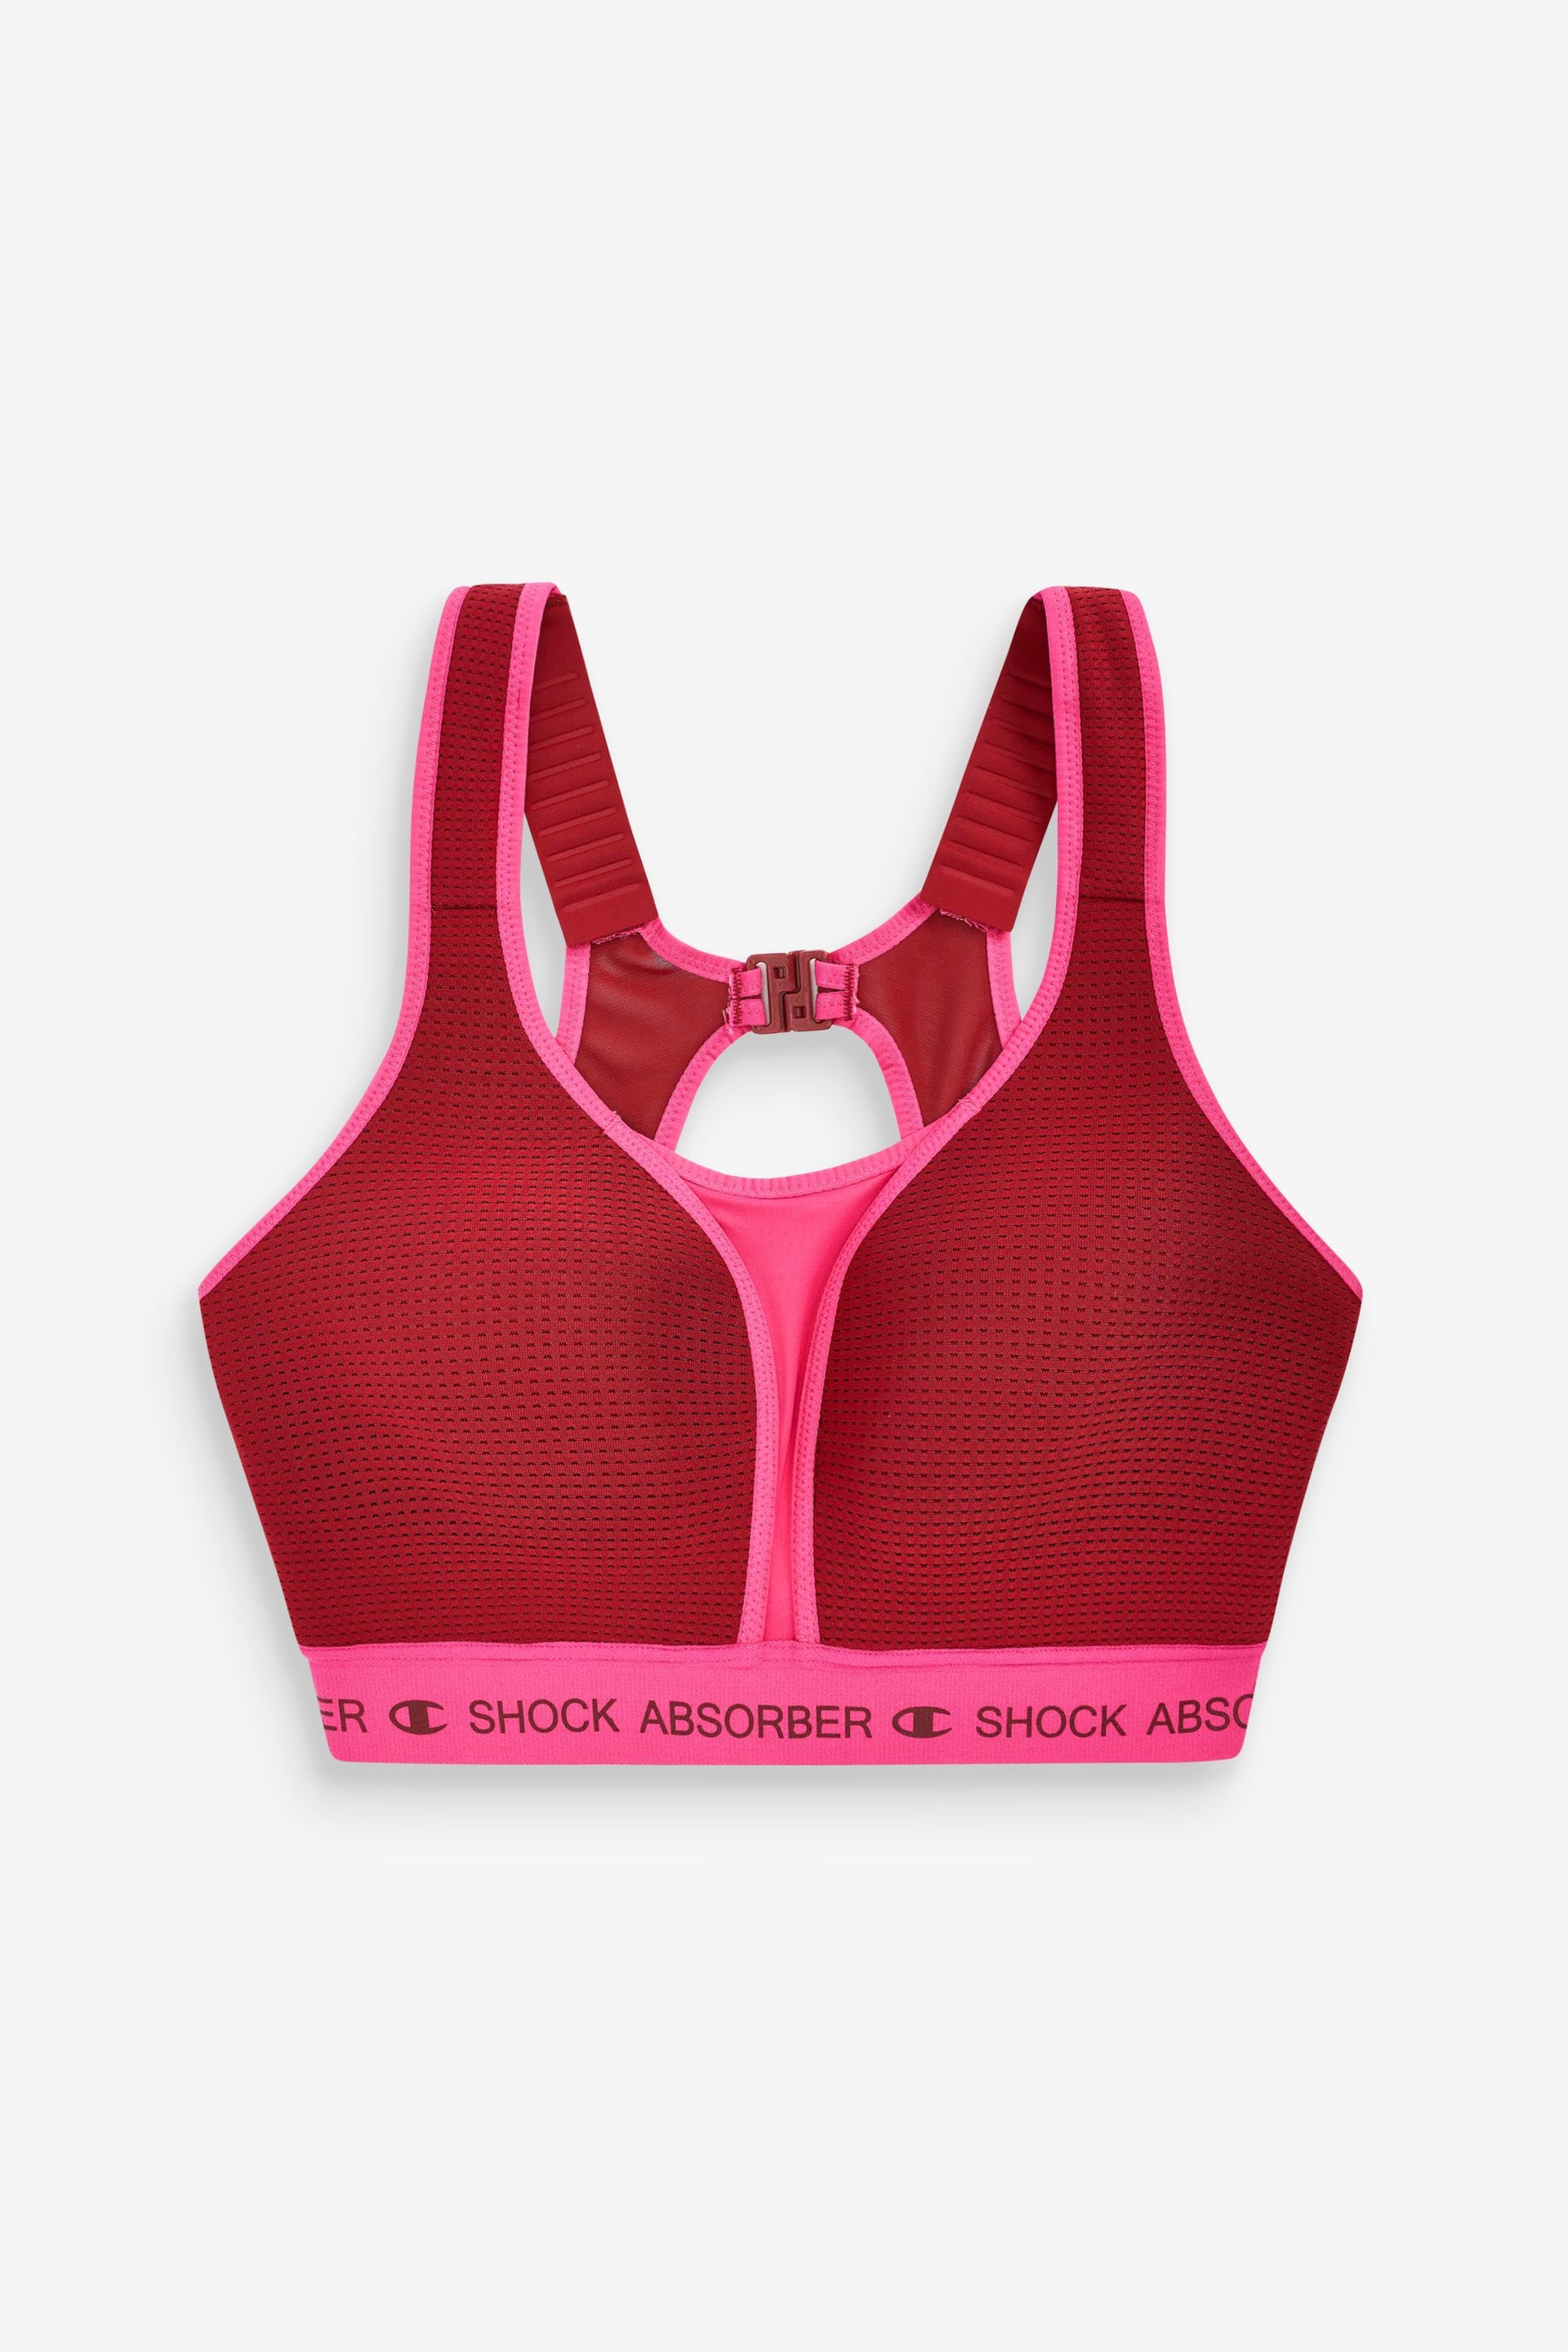 Shock Absorber Pink Ultimate Run Padded New Bra - Image 6 of 6